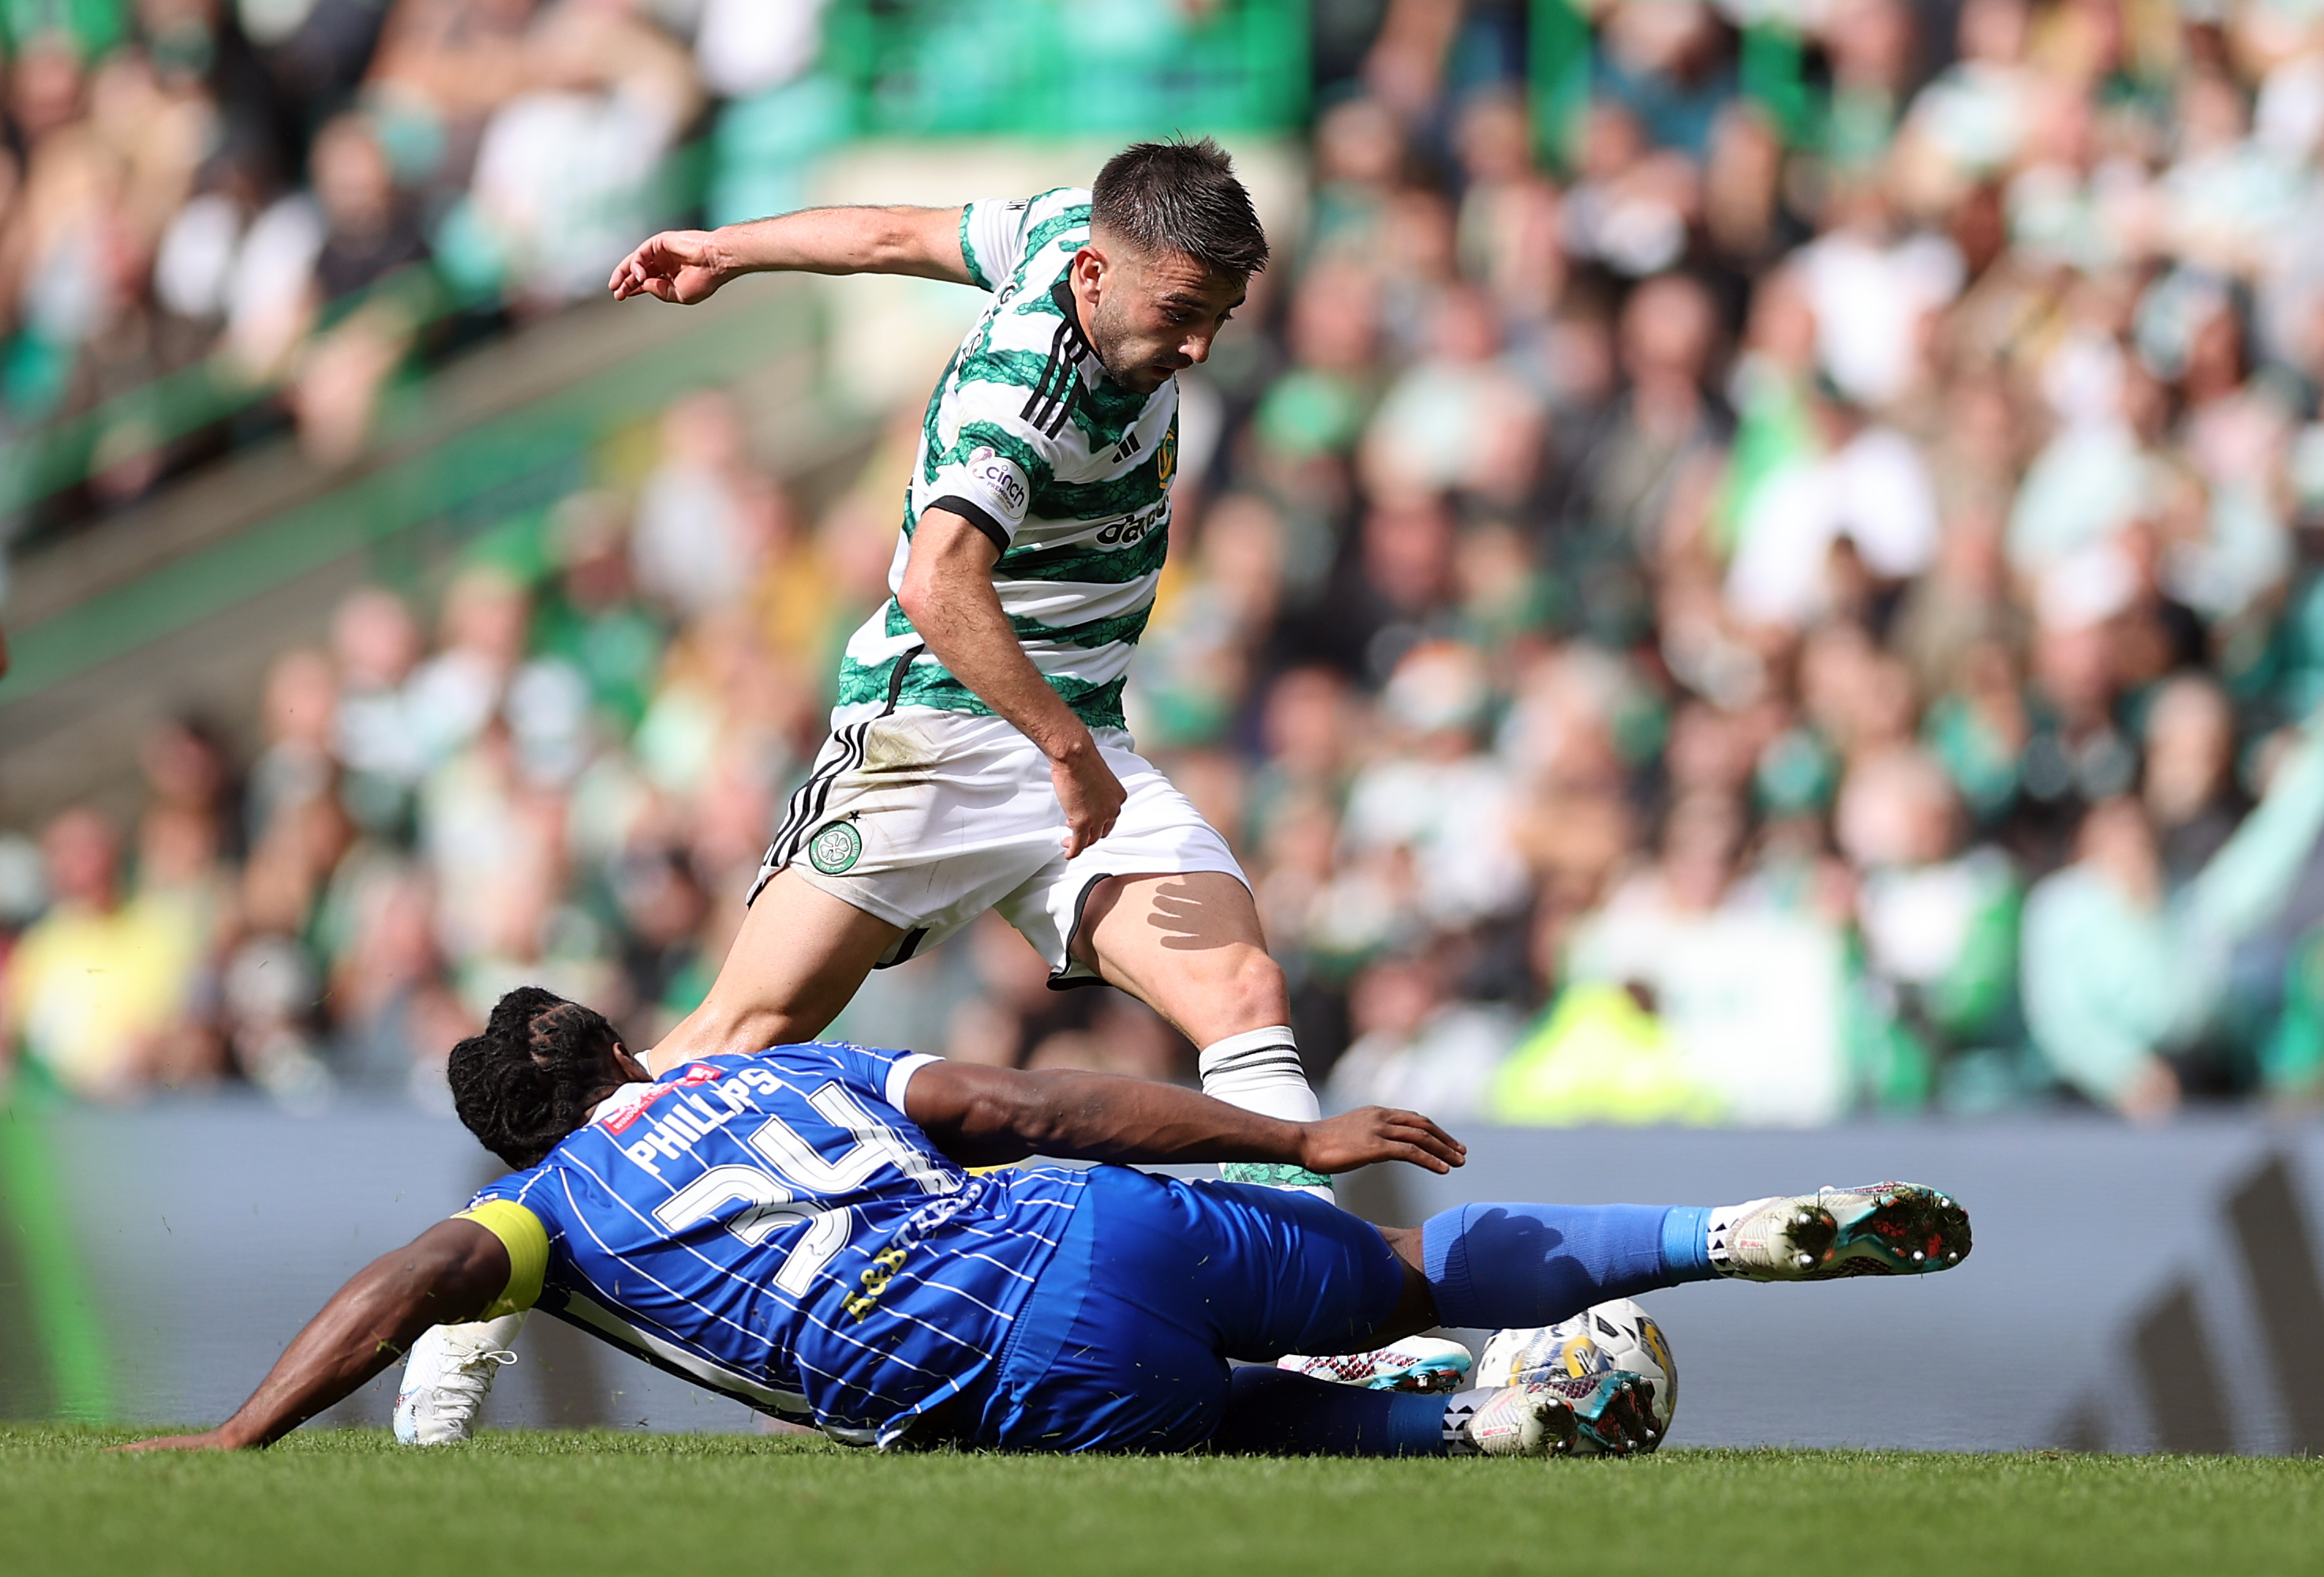 Rodgers' side were held to a goalless draw by St Johnstone in their last match at Celtic Park